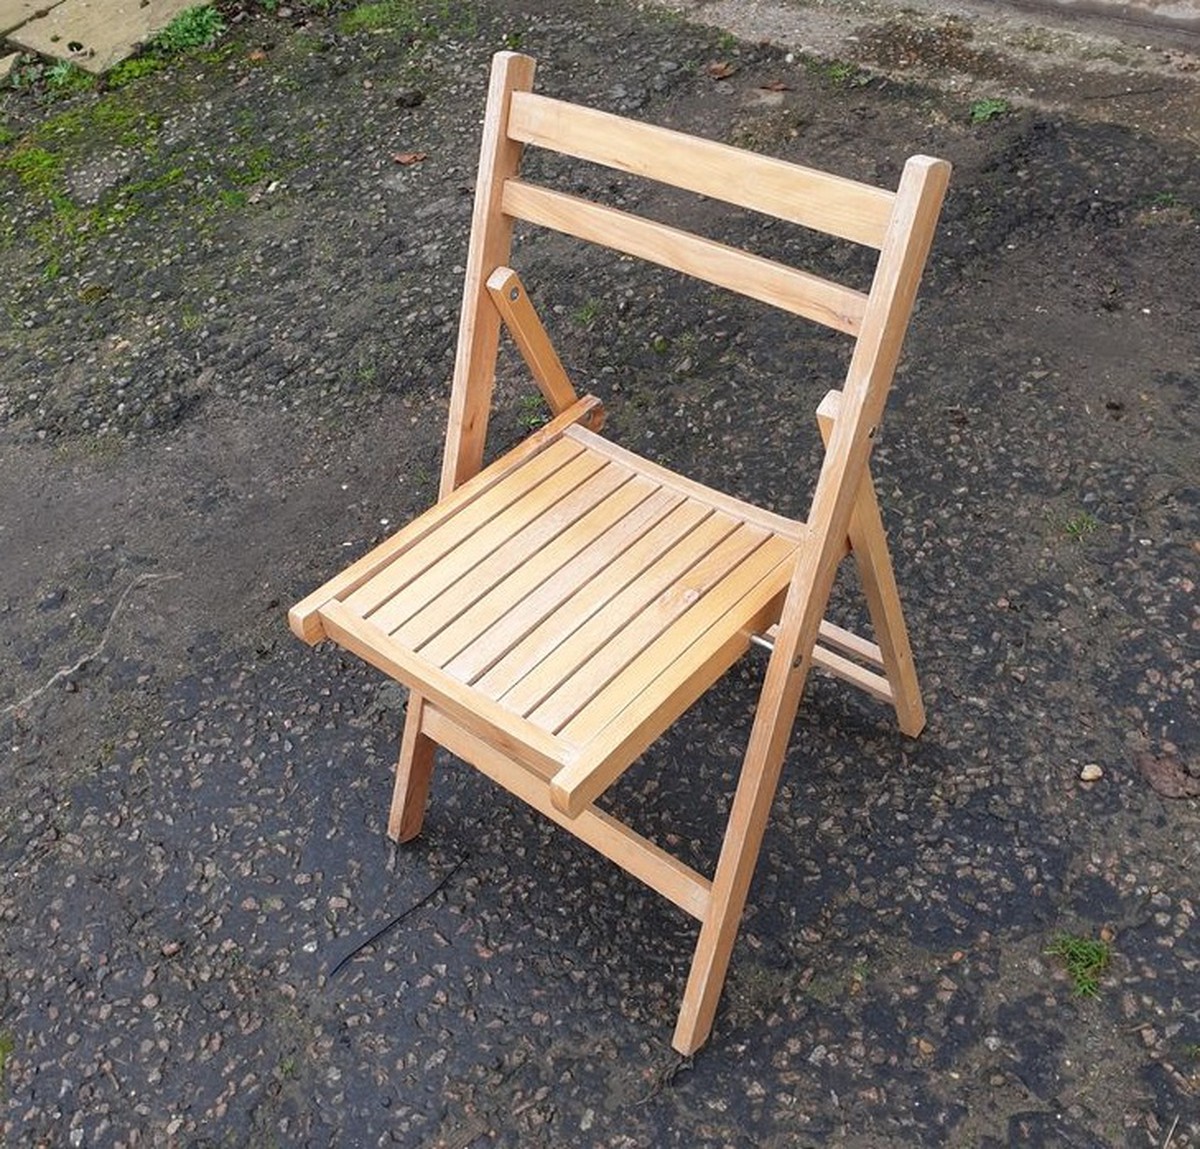 used folding chairs